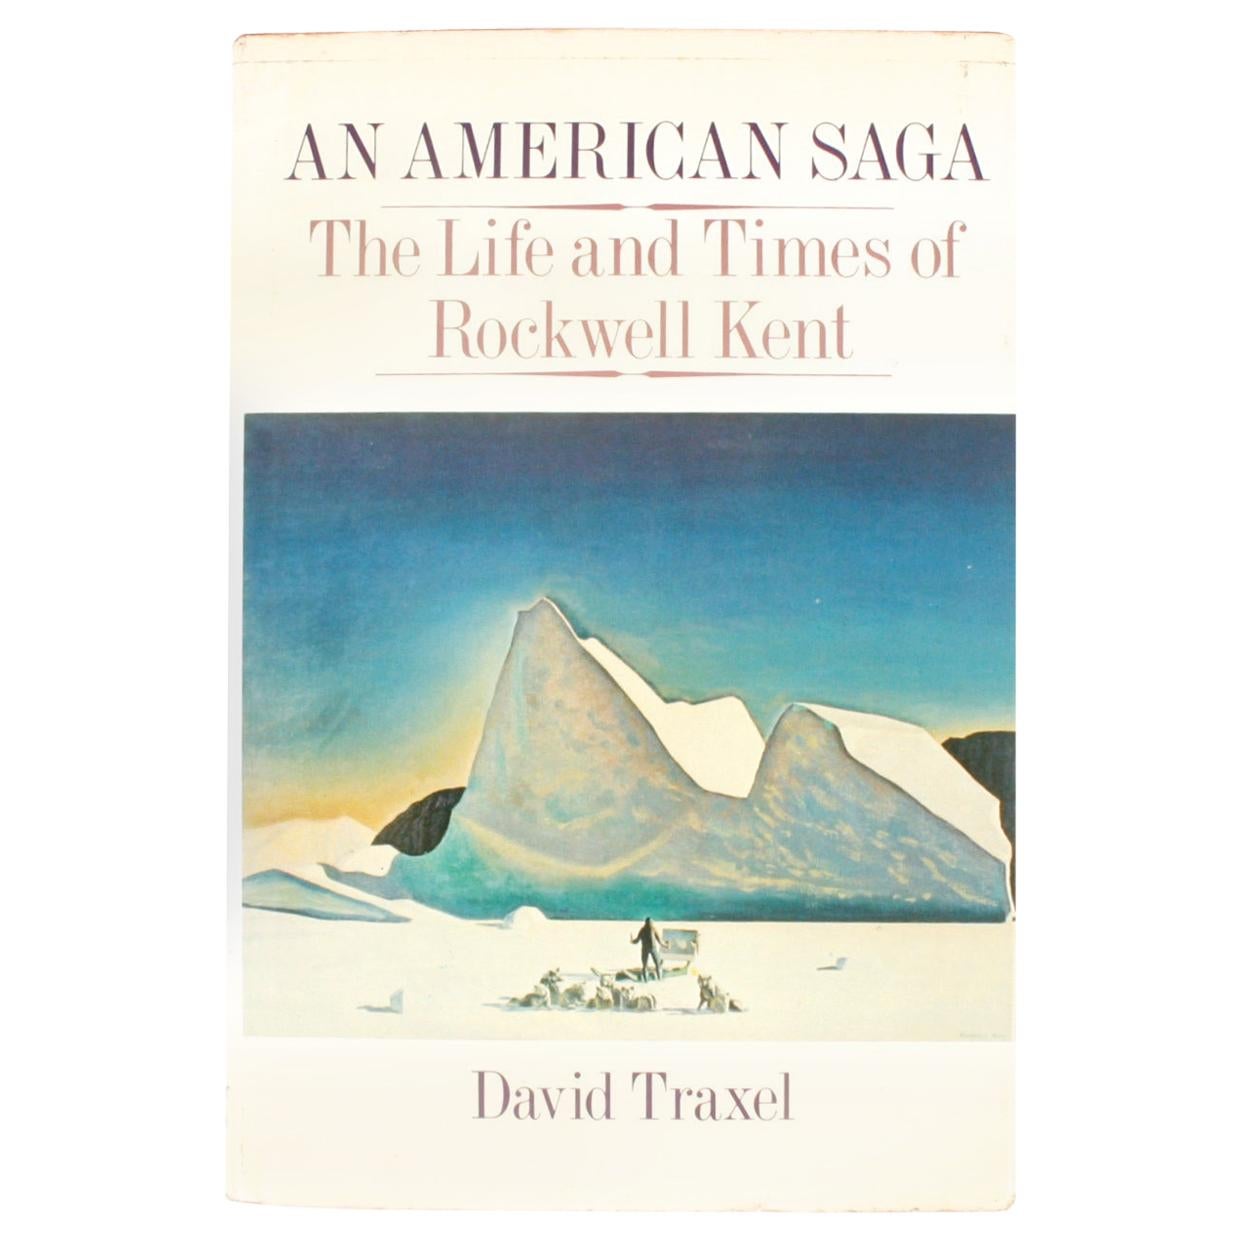 An American Saga: The Life and Times of Rockwell Kent, 1st Ed, Pre-Publication